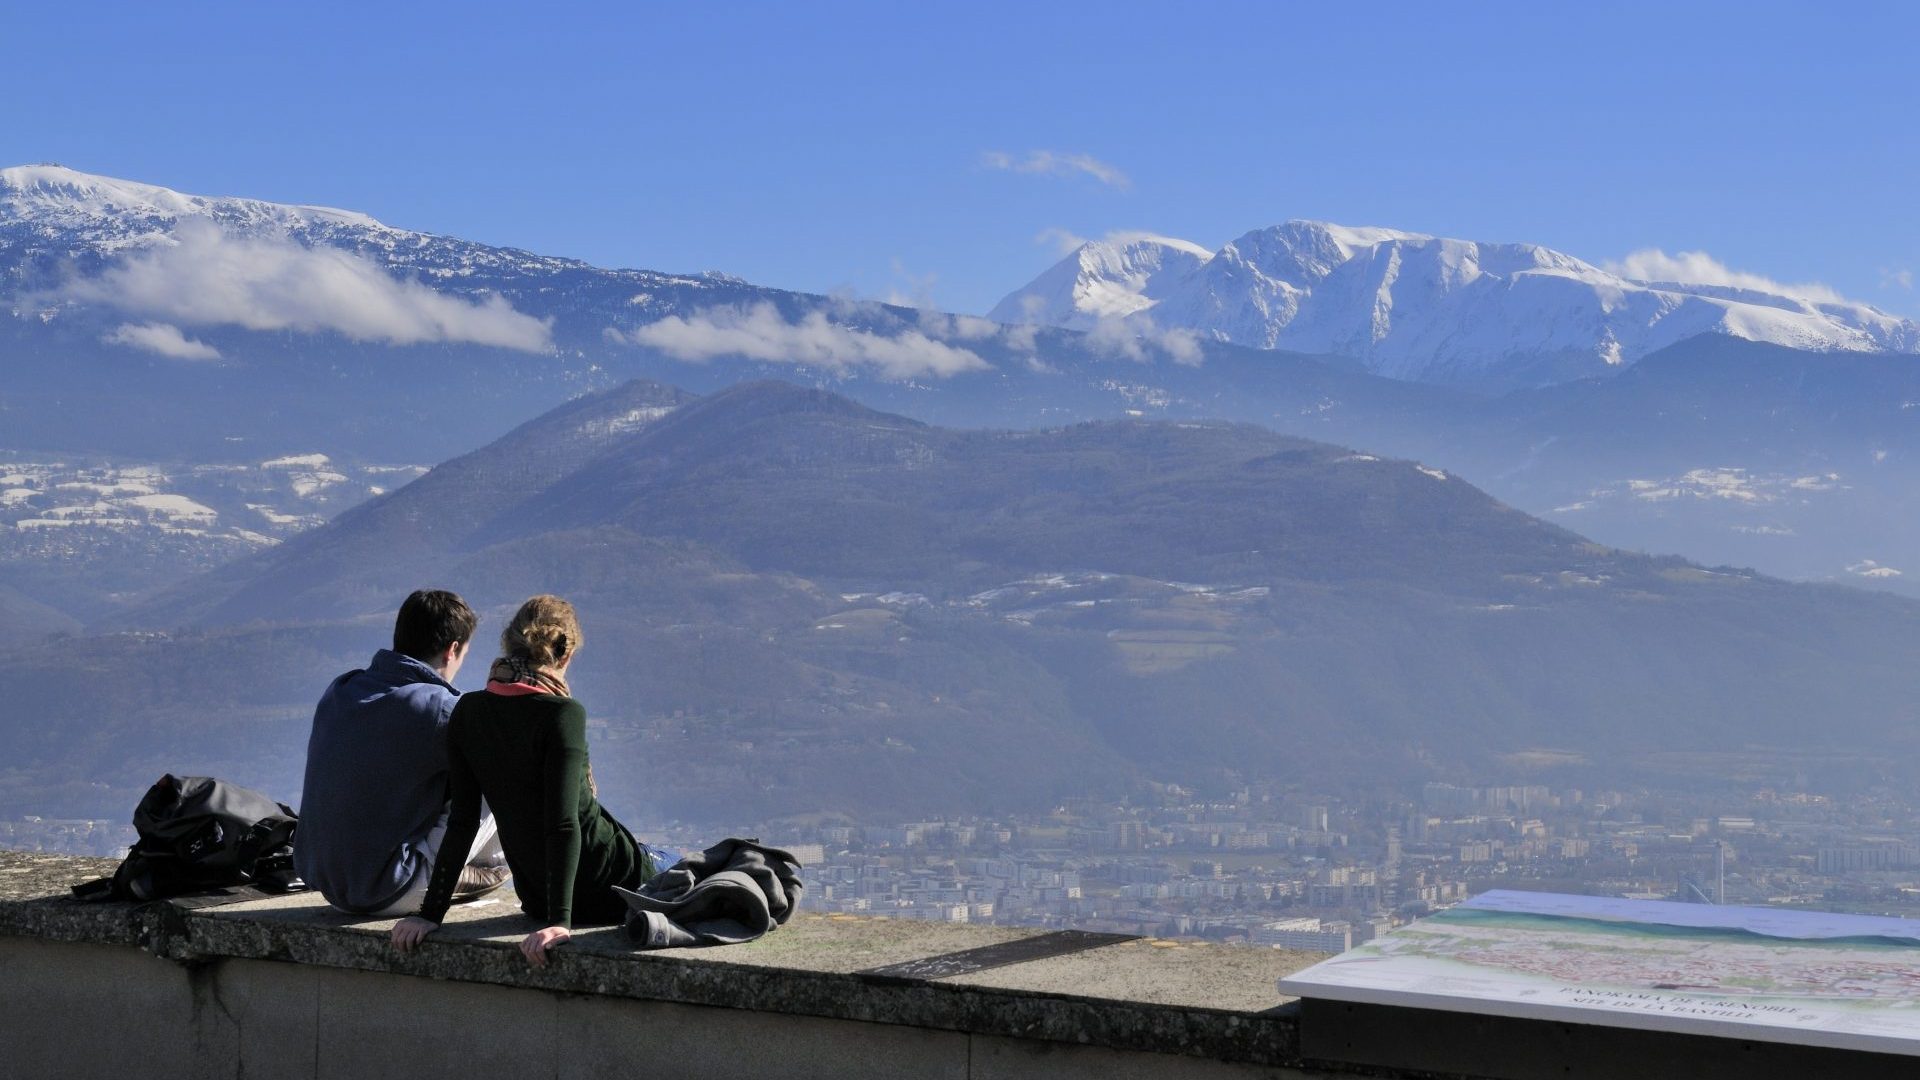 Grenoble, the Alps and Belledonne mountains from the terrace of the Bastille Fortress. Photo: Jarry Tripelon/Gamma-Rapho/Getty